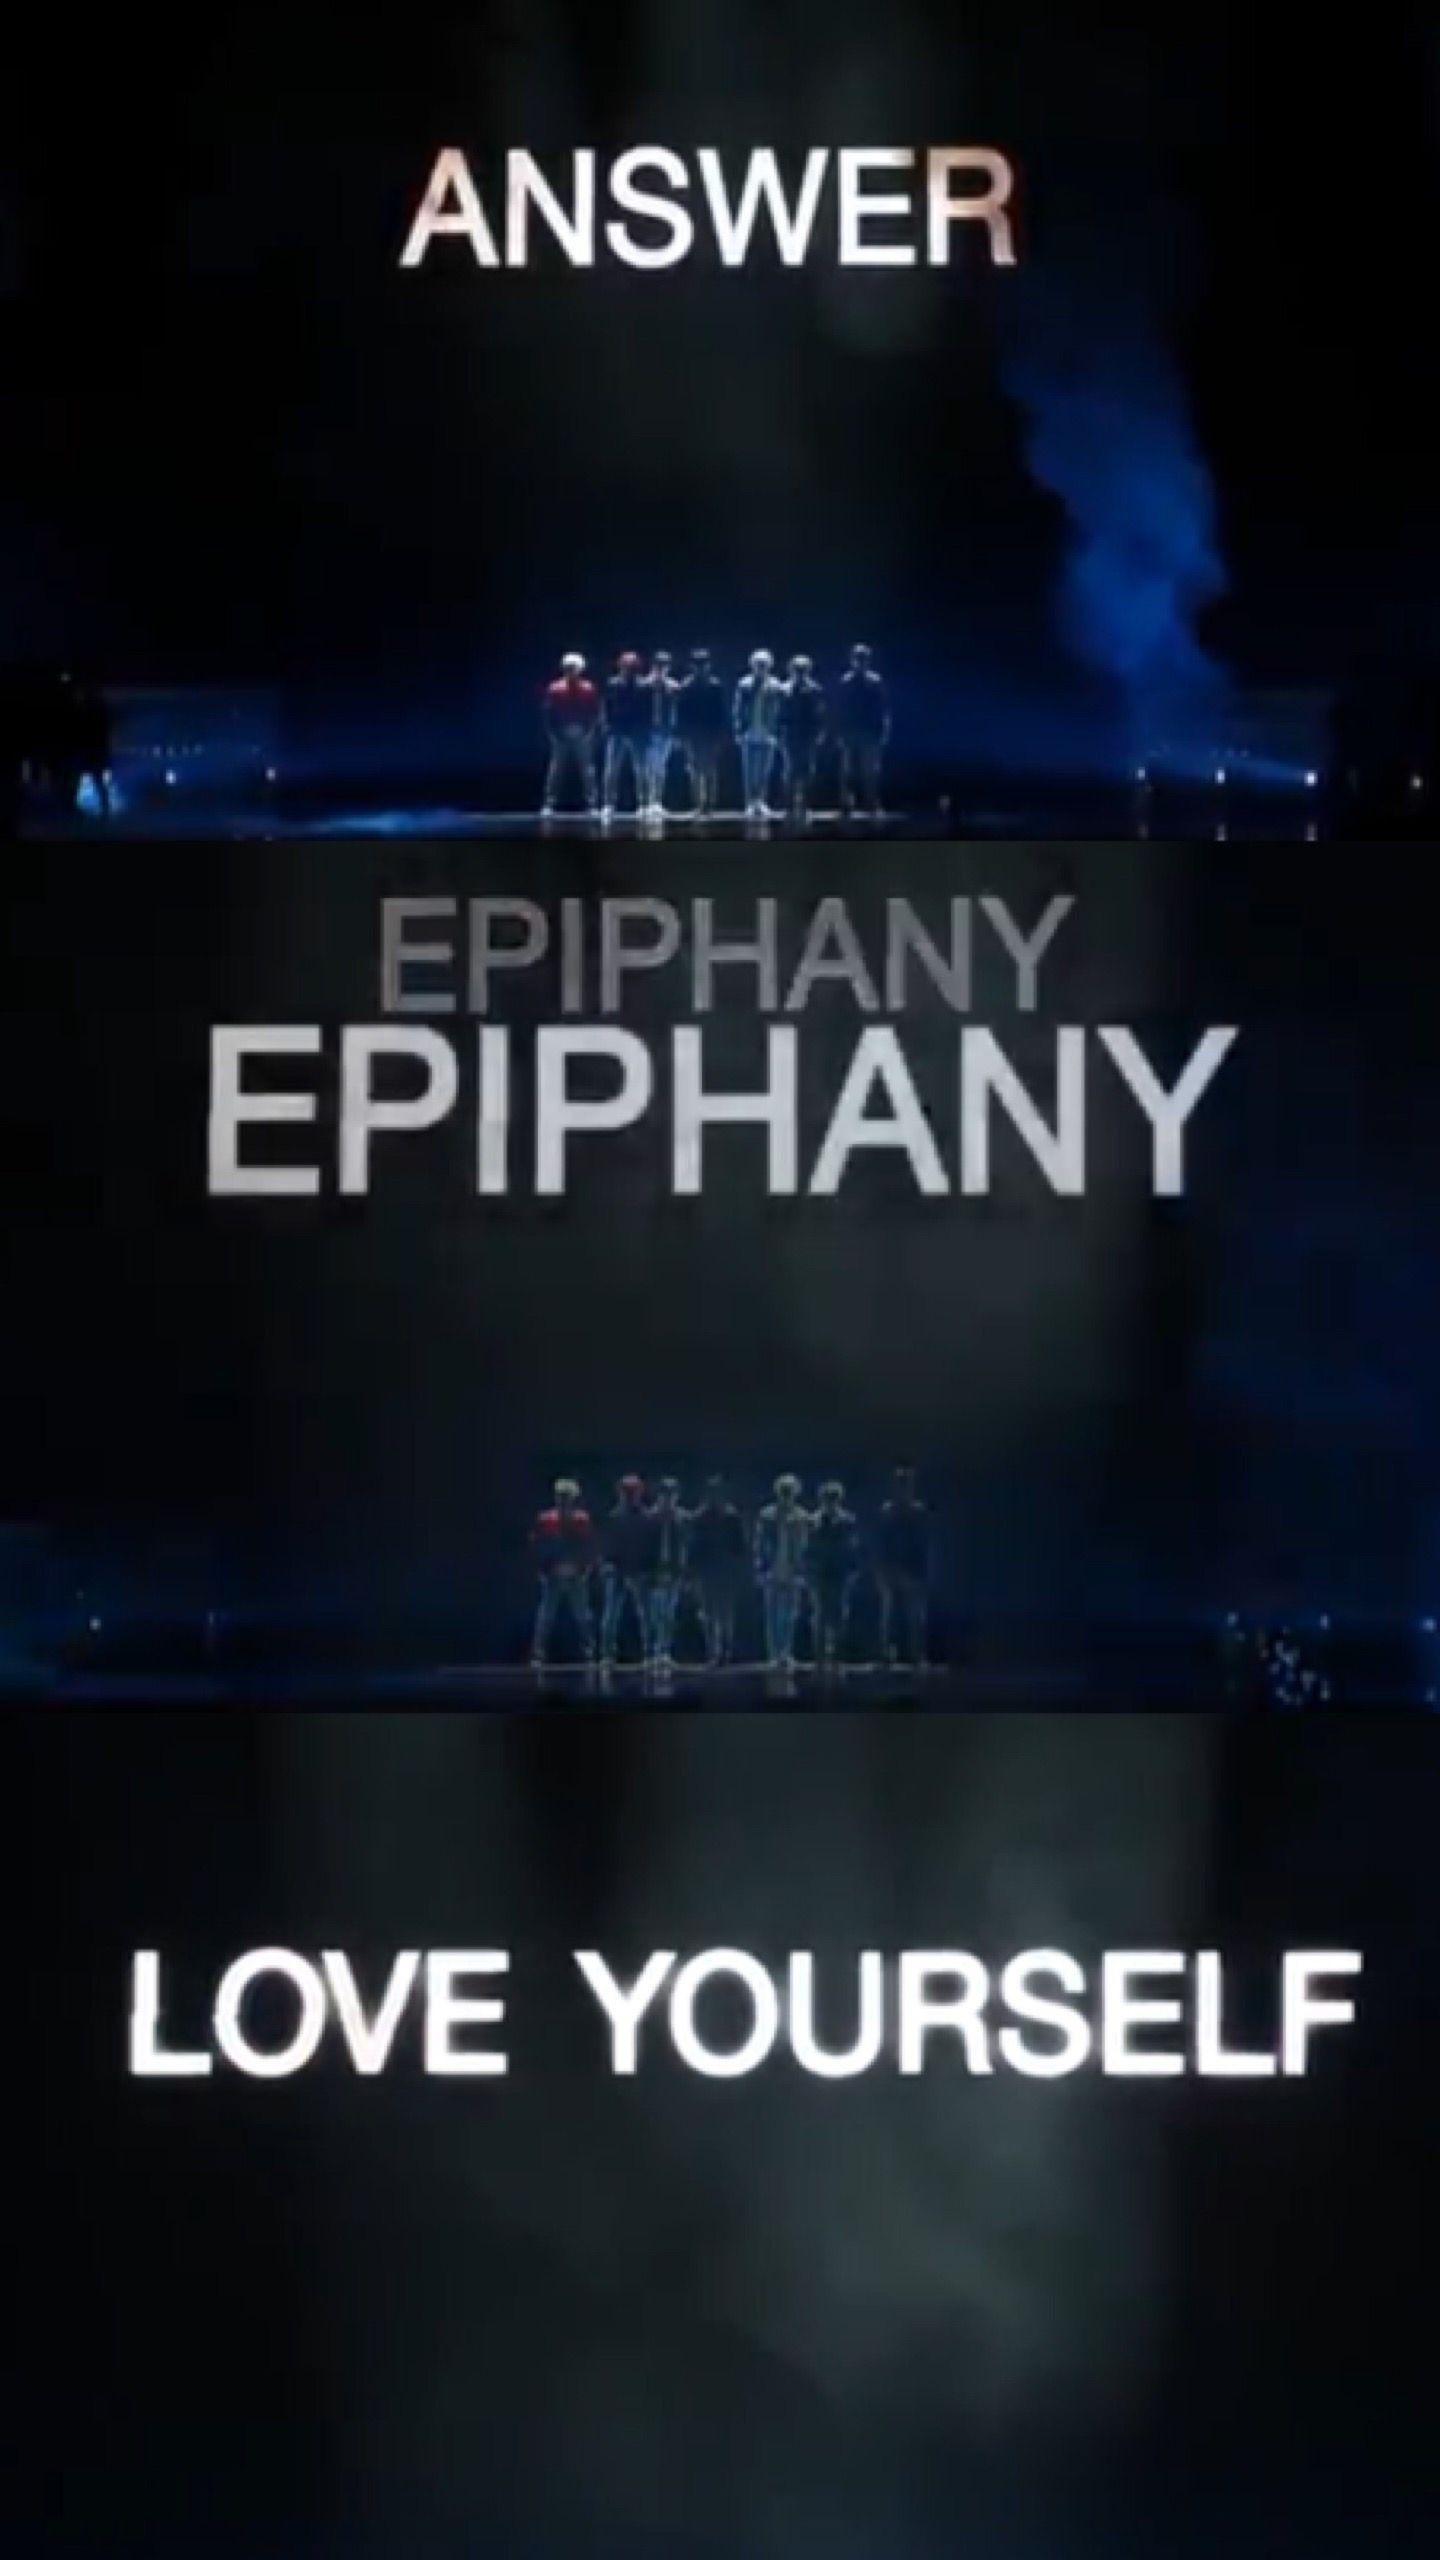 BTS loveyourself answer epiphany